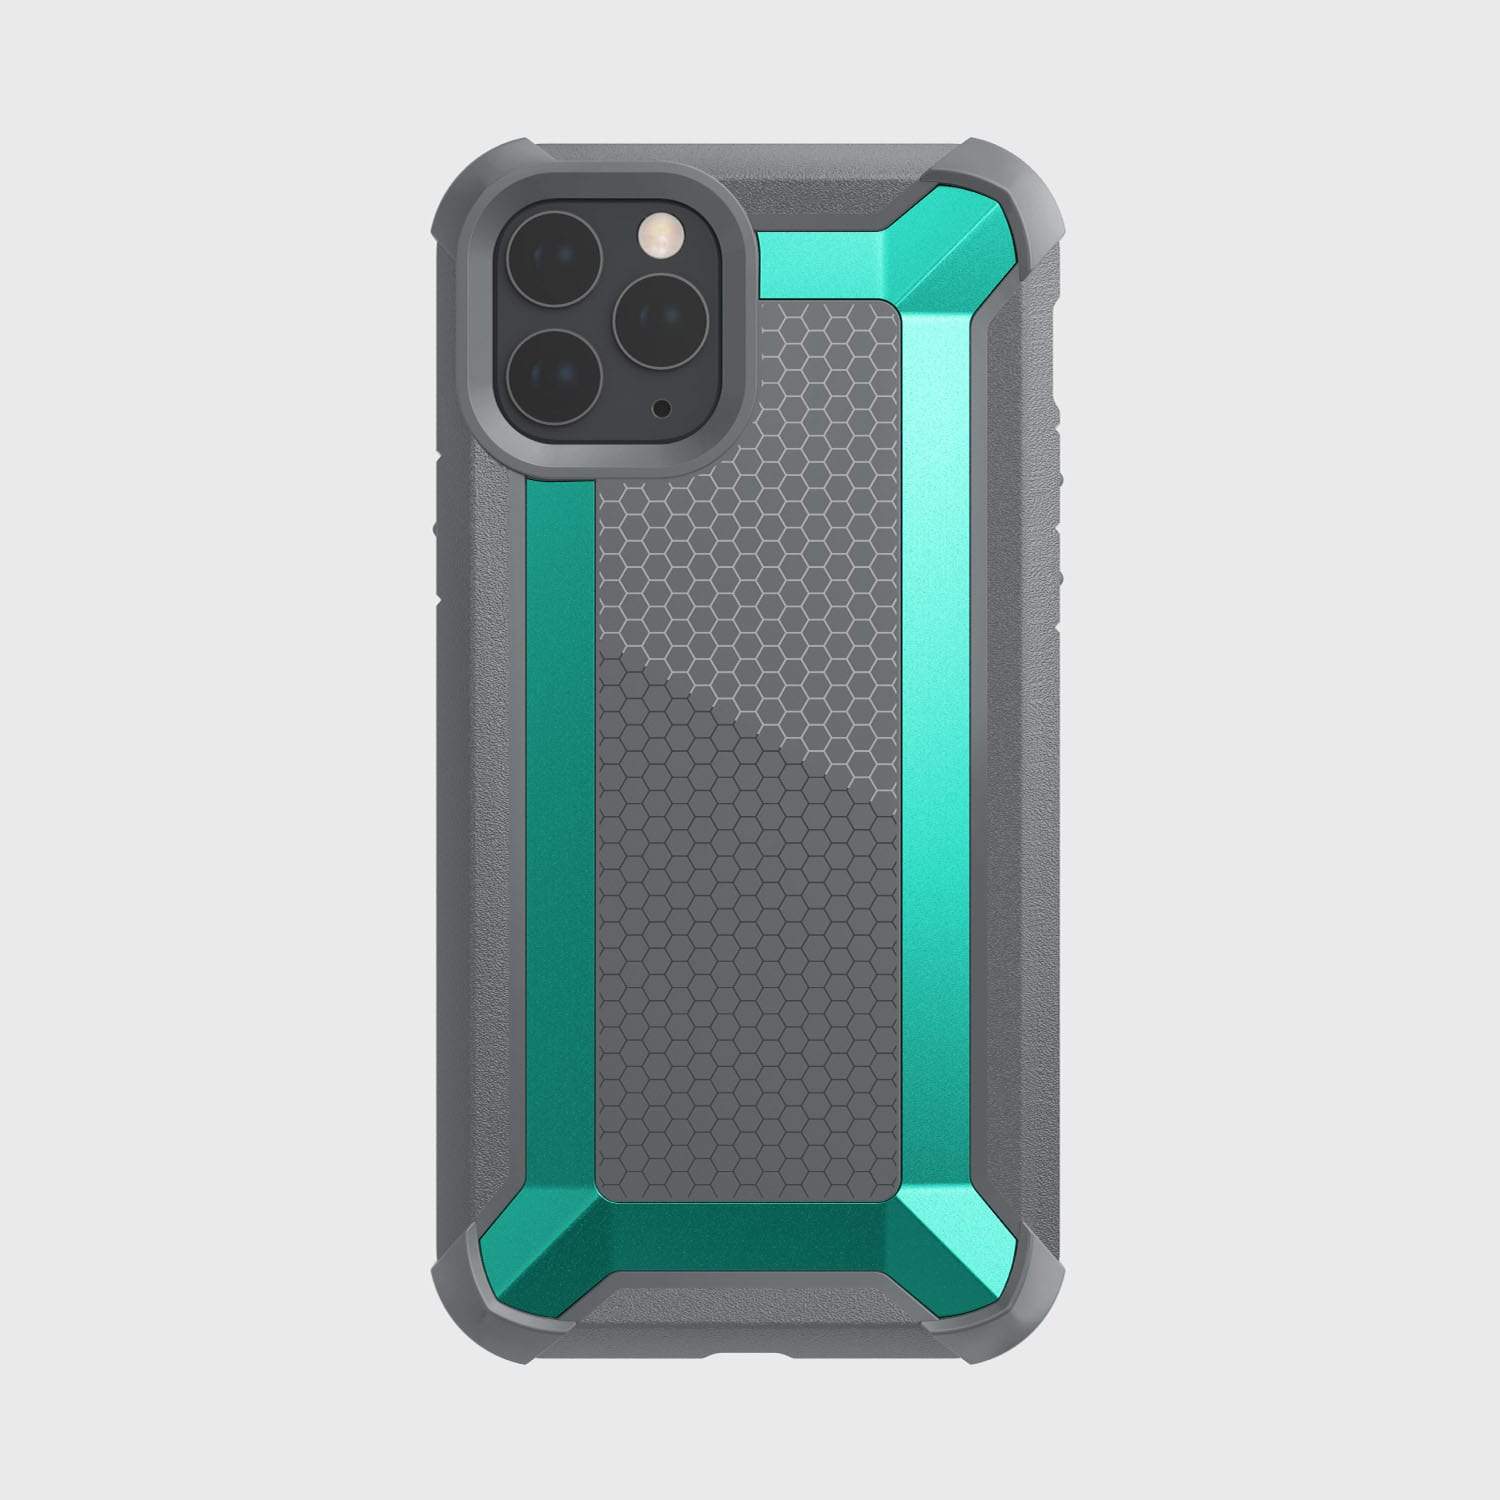 Upgrade your iPhone 11 Pro case with the Raptic Tactical protective case in grey, featuring a shock-absorbing rubber exterior. This case meets Military Standard MIL-STD-810G for the iPhone 11 Pro Max Case - TACTICAL from Raptic.